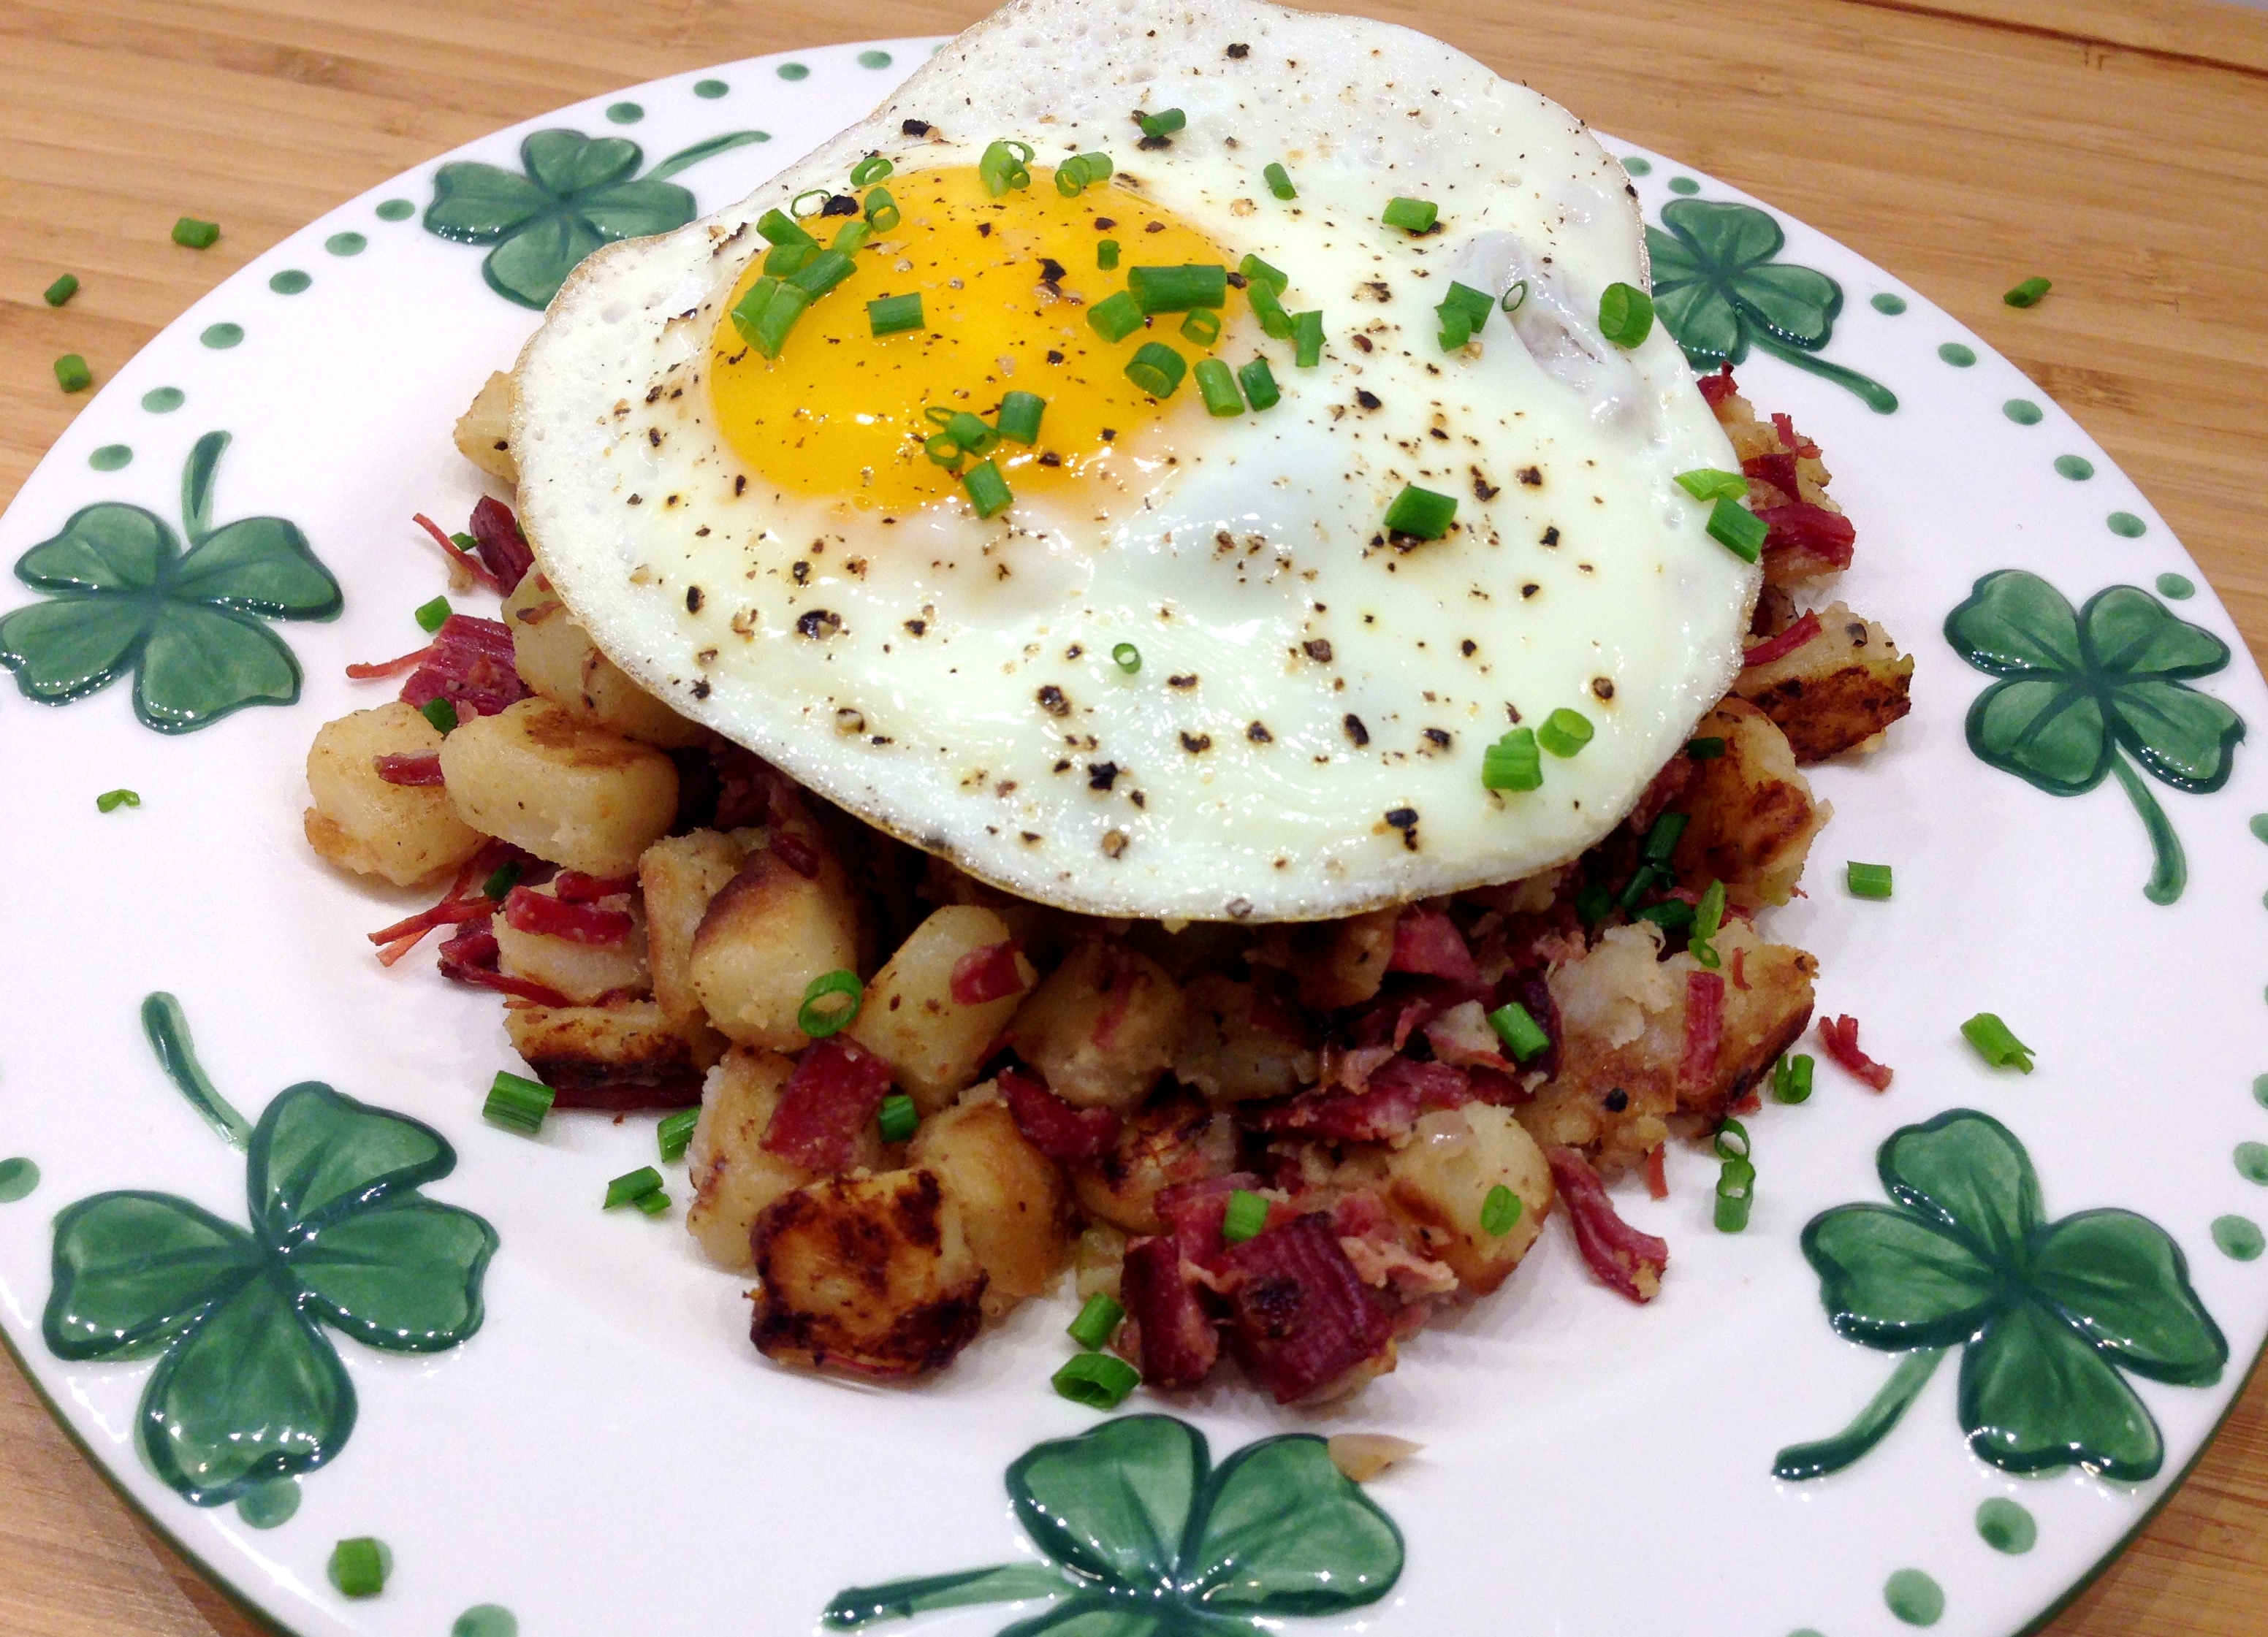 Plate the Corned Beef Hash and Eggs